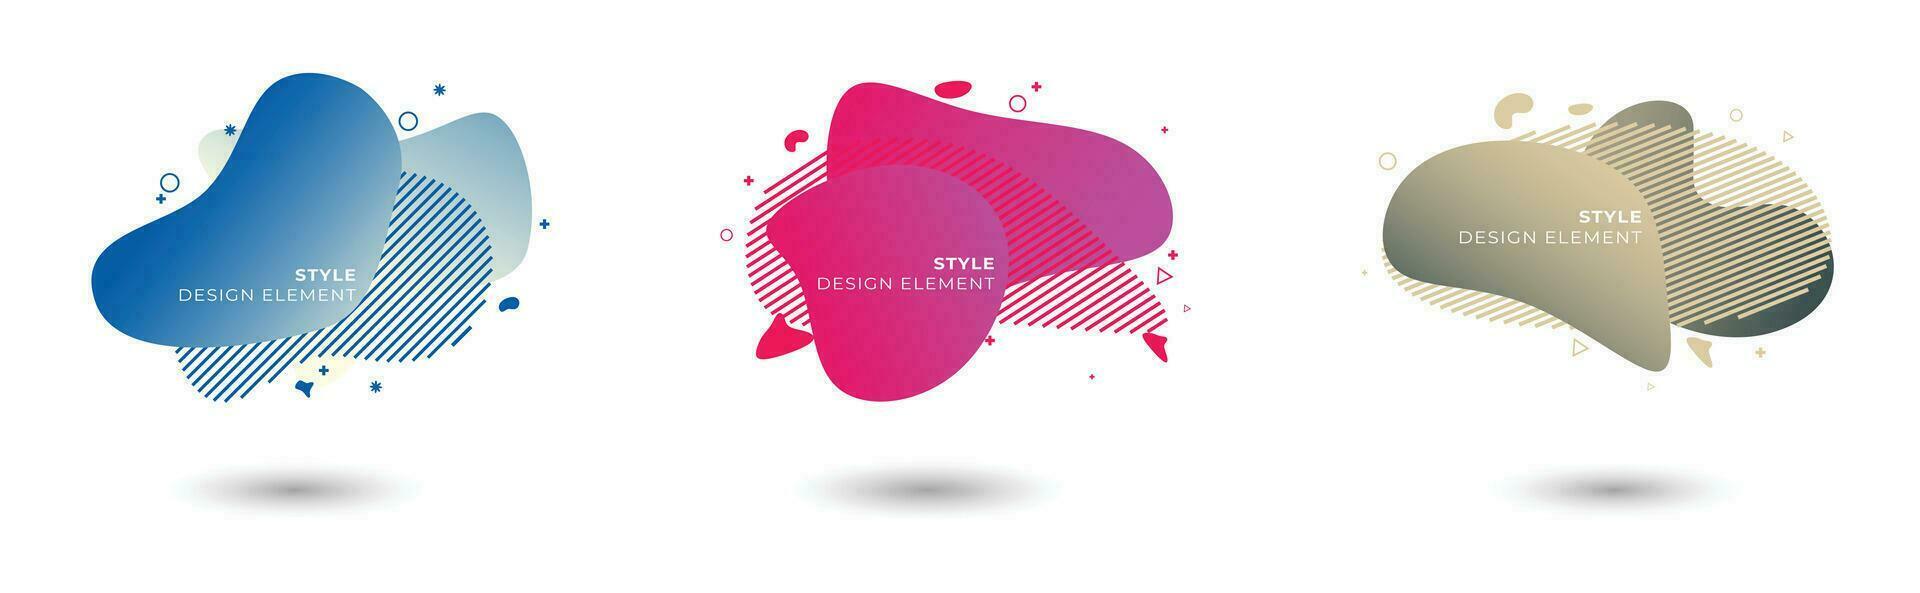 set of abstract fluid shape elements.  gradient graphic elements ideal for banners, flayers, flyers or presentations and more vector